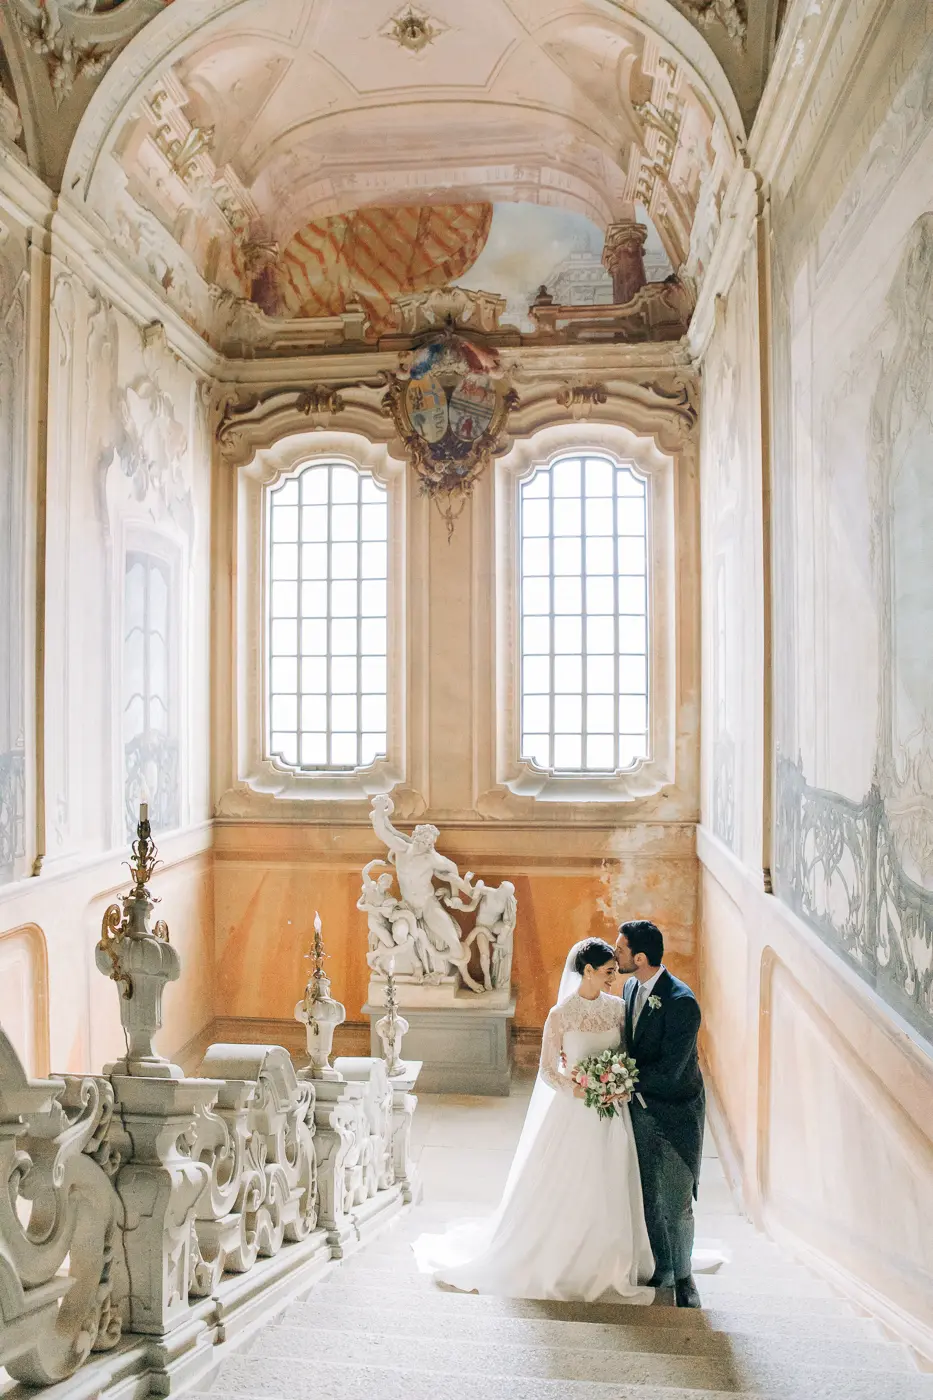 Beautiful wedding couple stand on the majestic staircase with frescoes on the wall and ceiling in the old Italian villa Arconat